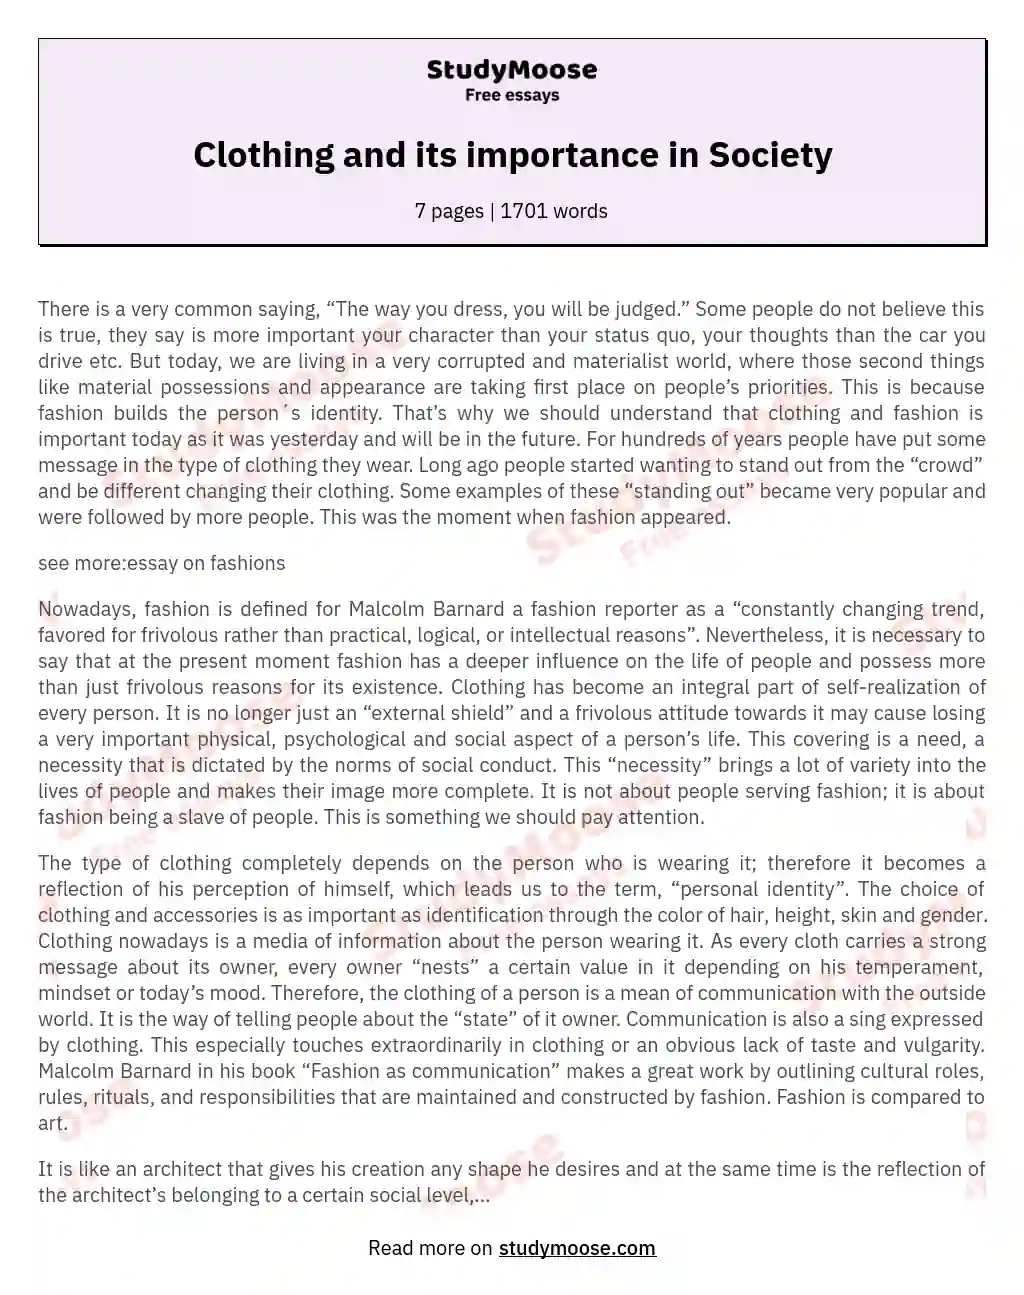 Clothing and its importance in Society essay